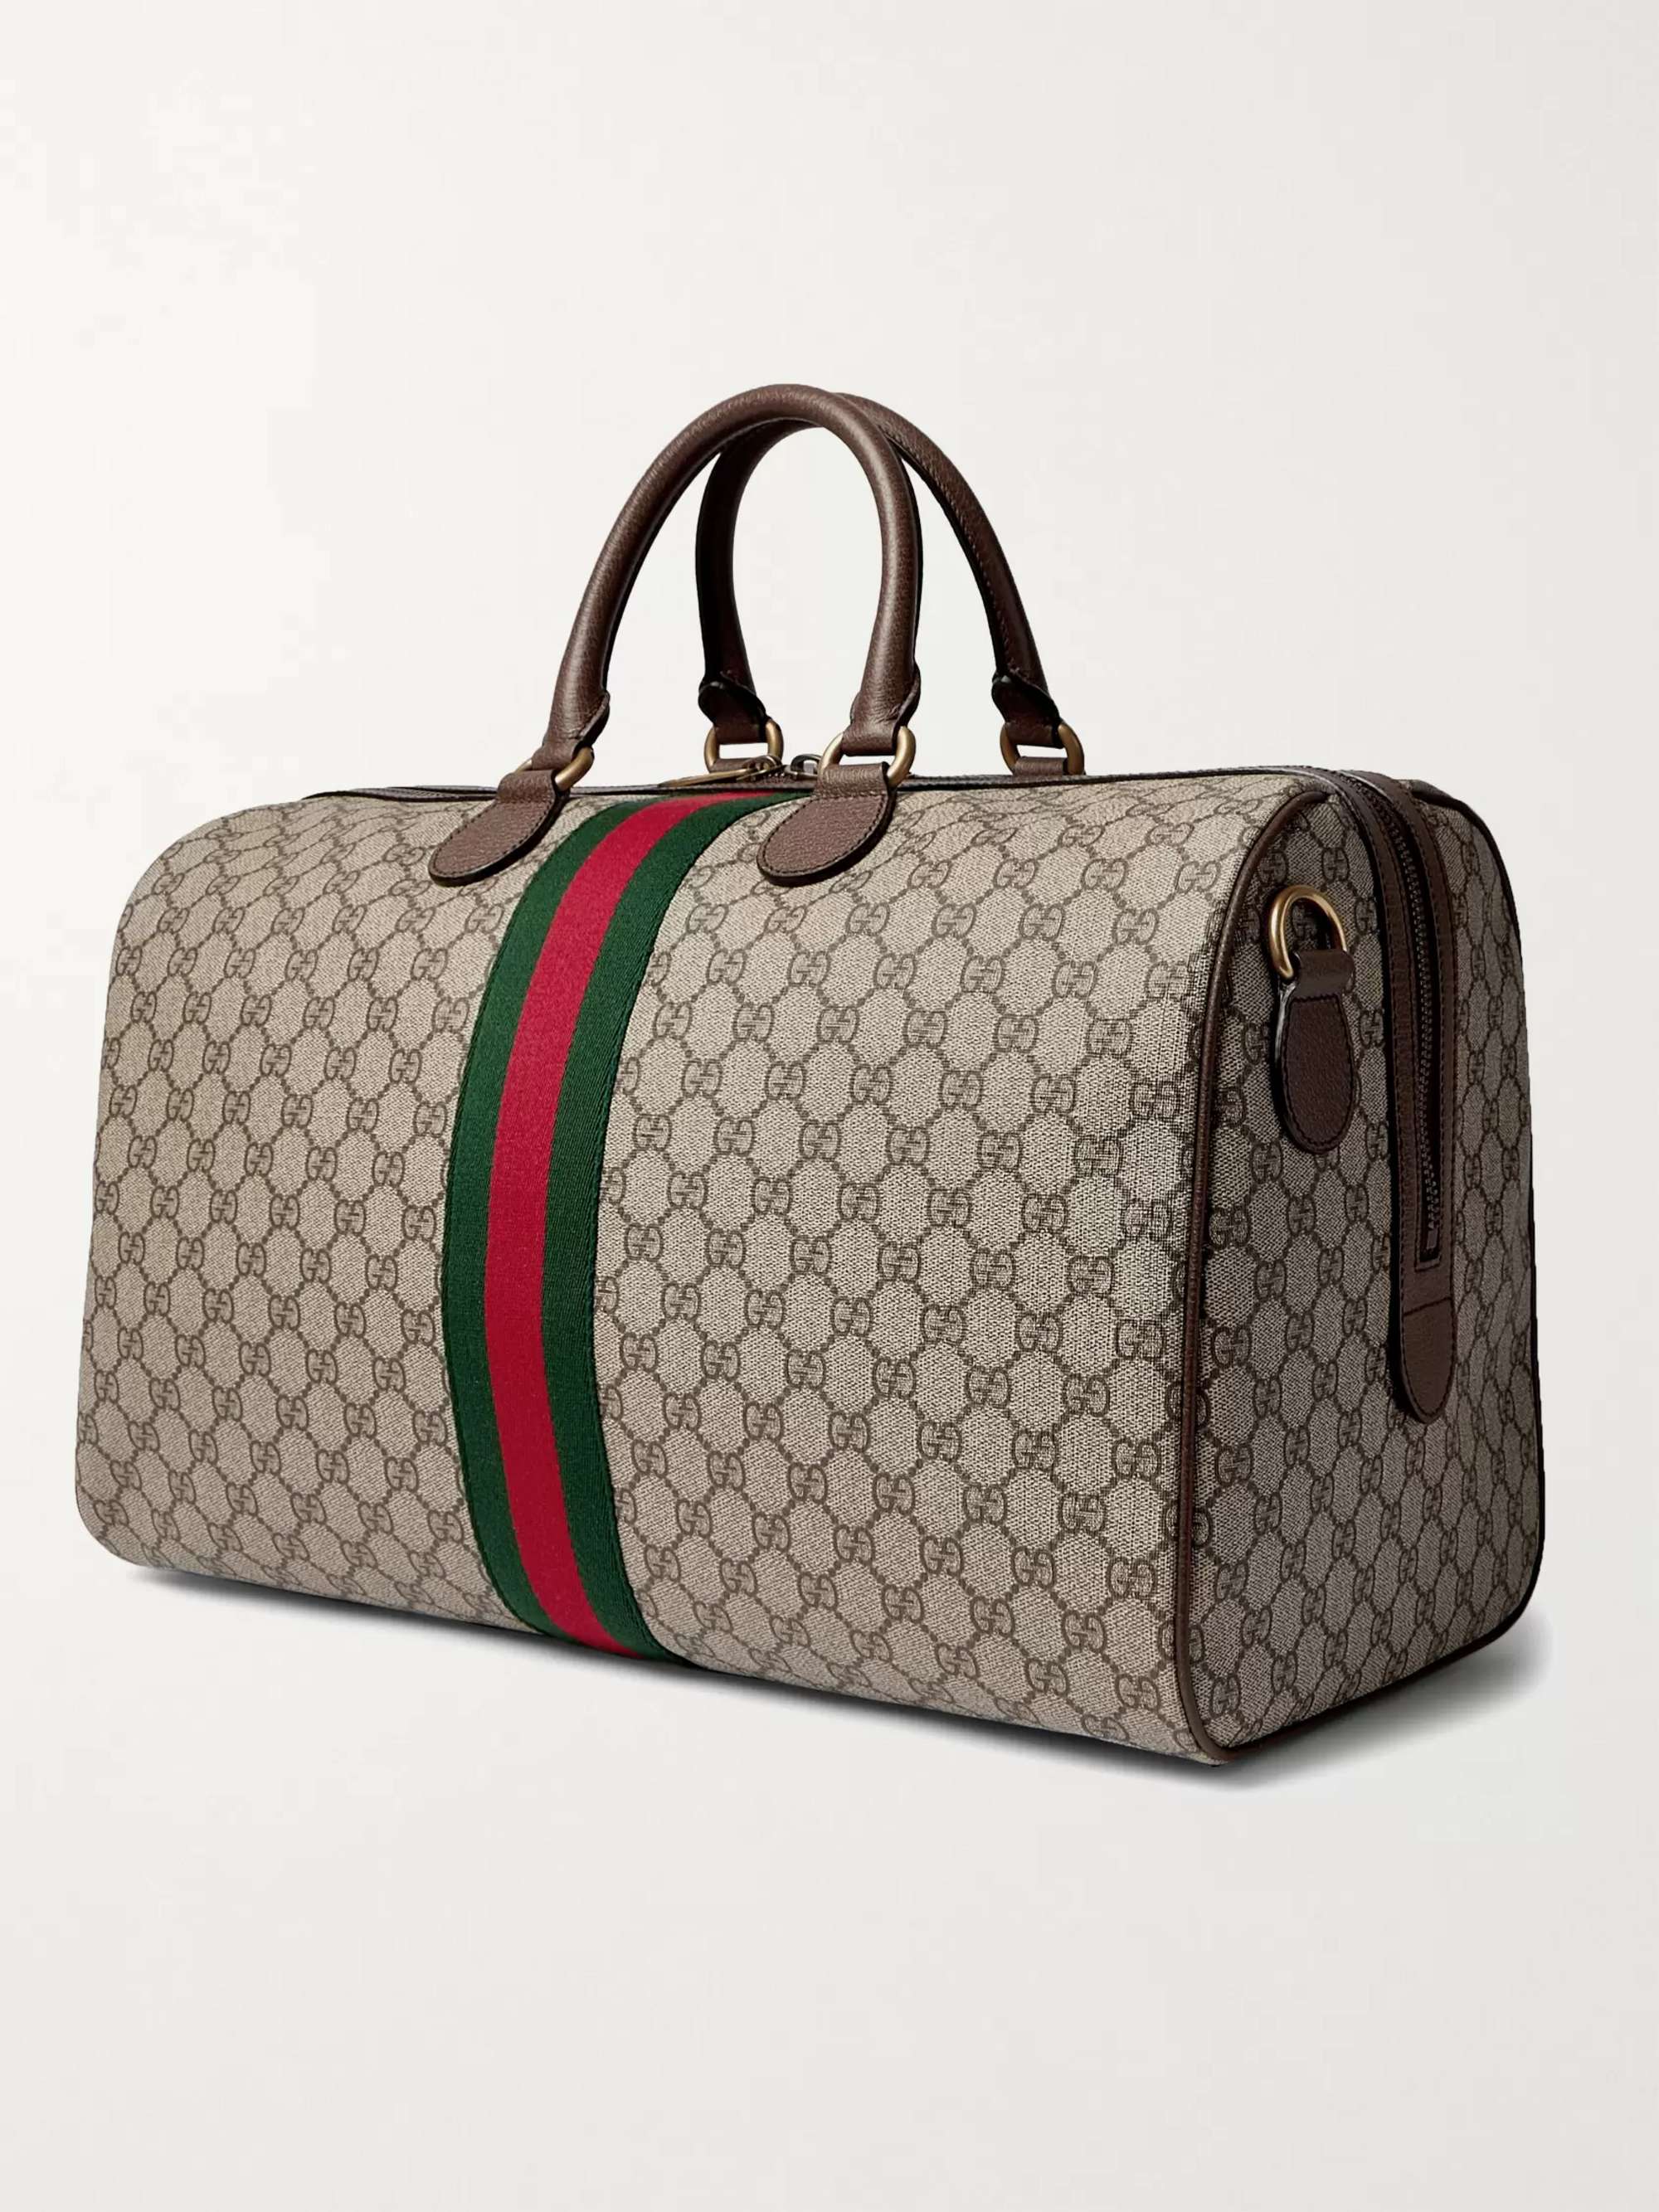 Brown Savoy Leather and Webbing-Trimmed Monogrammed Coated-Canvas Duffle Bag  | GUCCI | MR PORTER